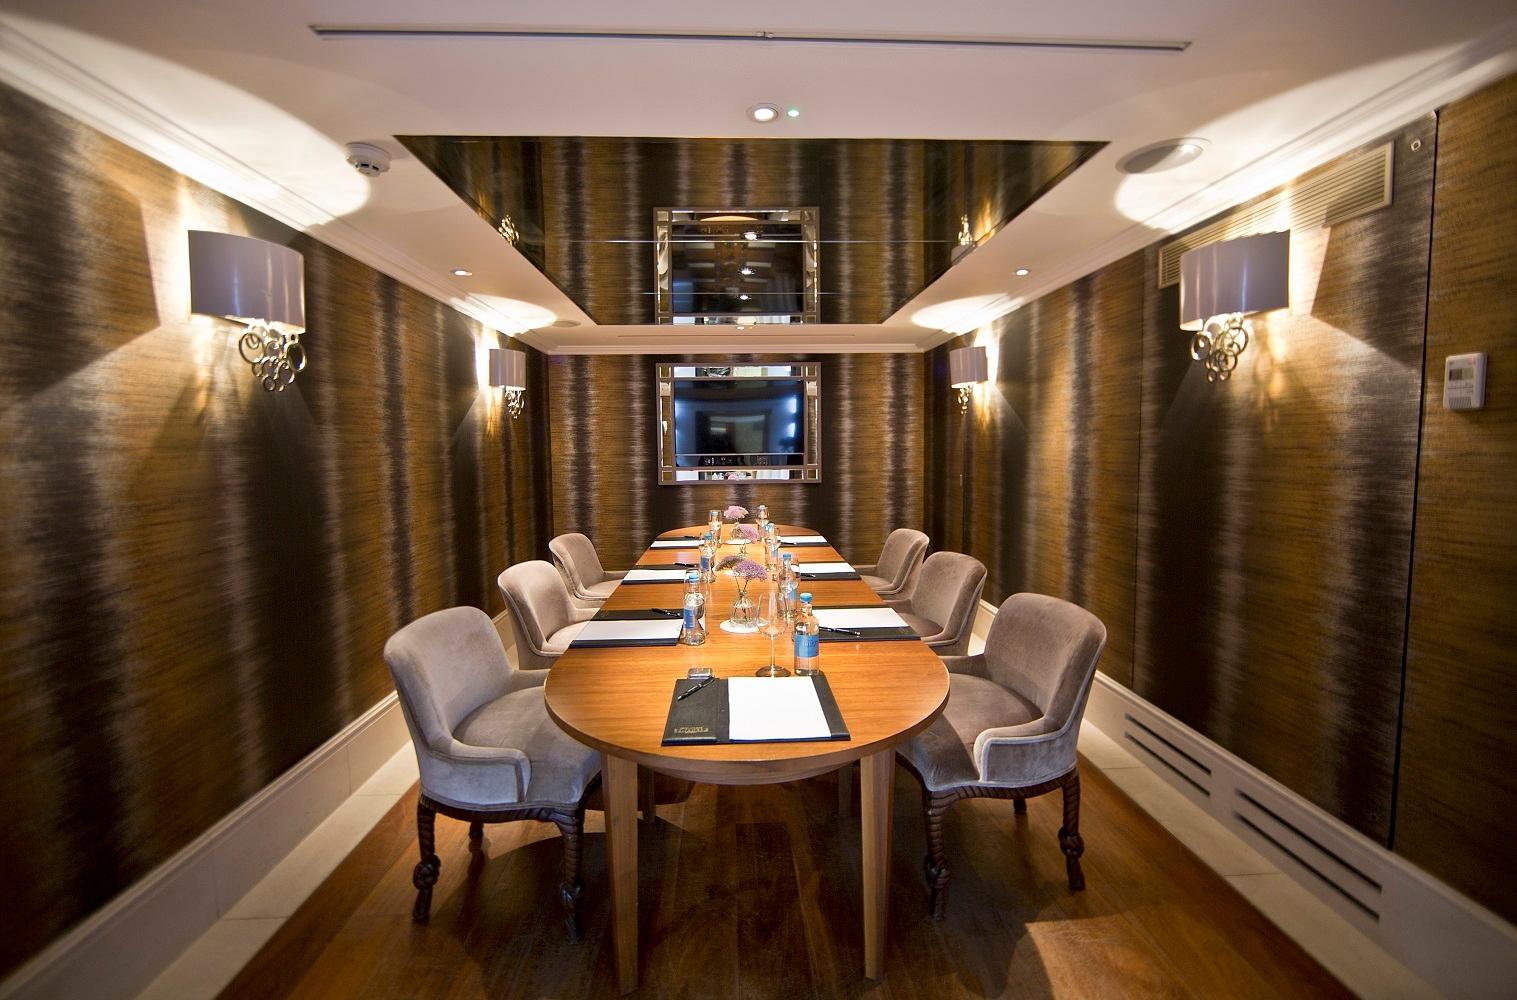 St. James's Hotel And Club Mayfair, The Wellington Boardroom photo #0